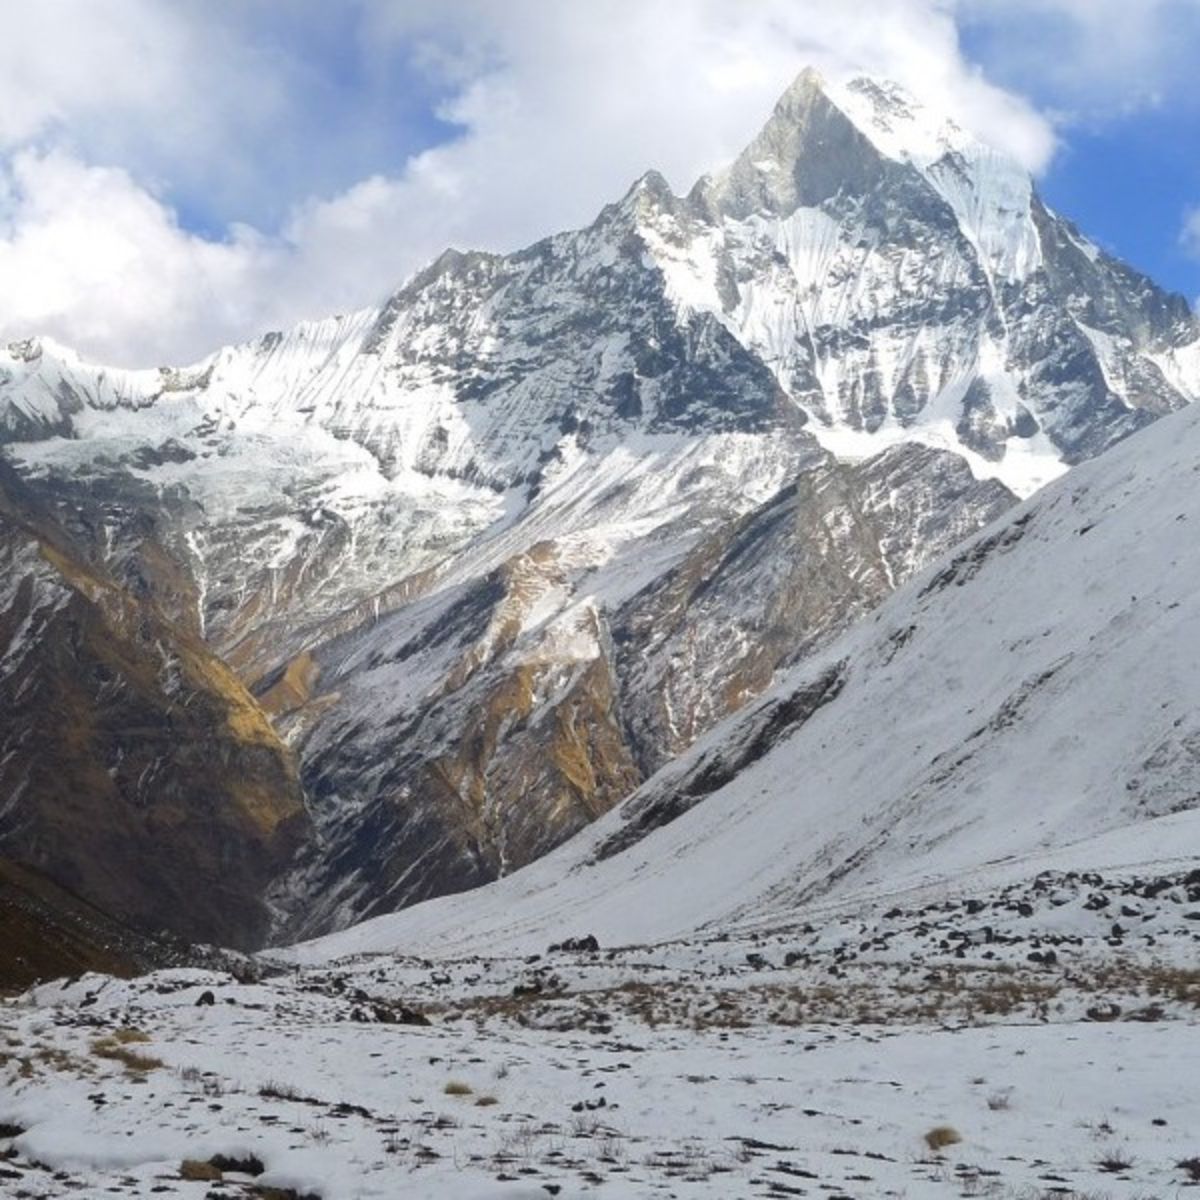 Footpath through the Annapurna mountains, which are covered in snow